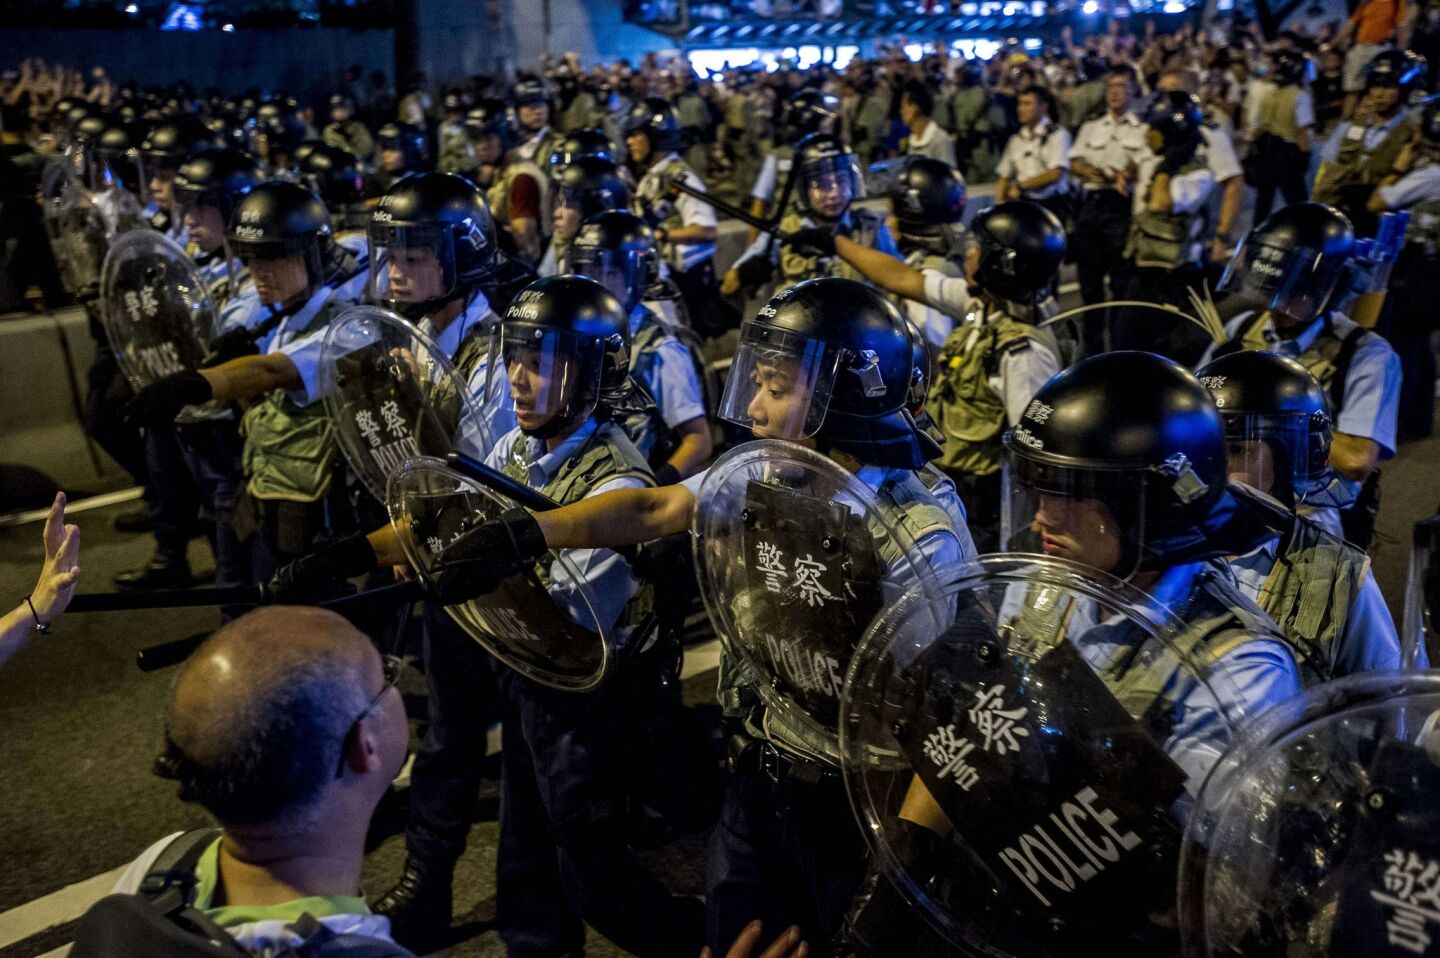 Police confront pro-democracy protesters.